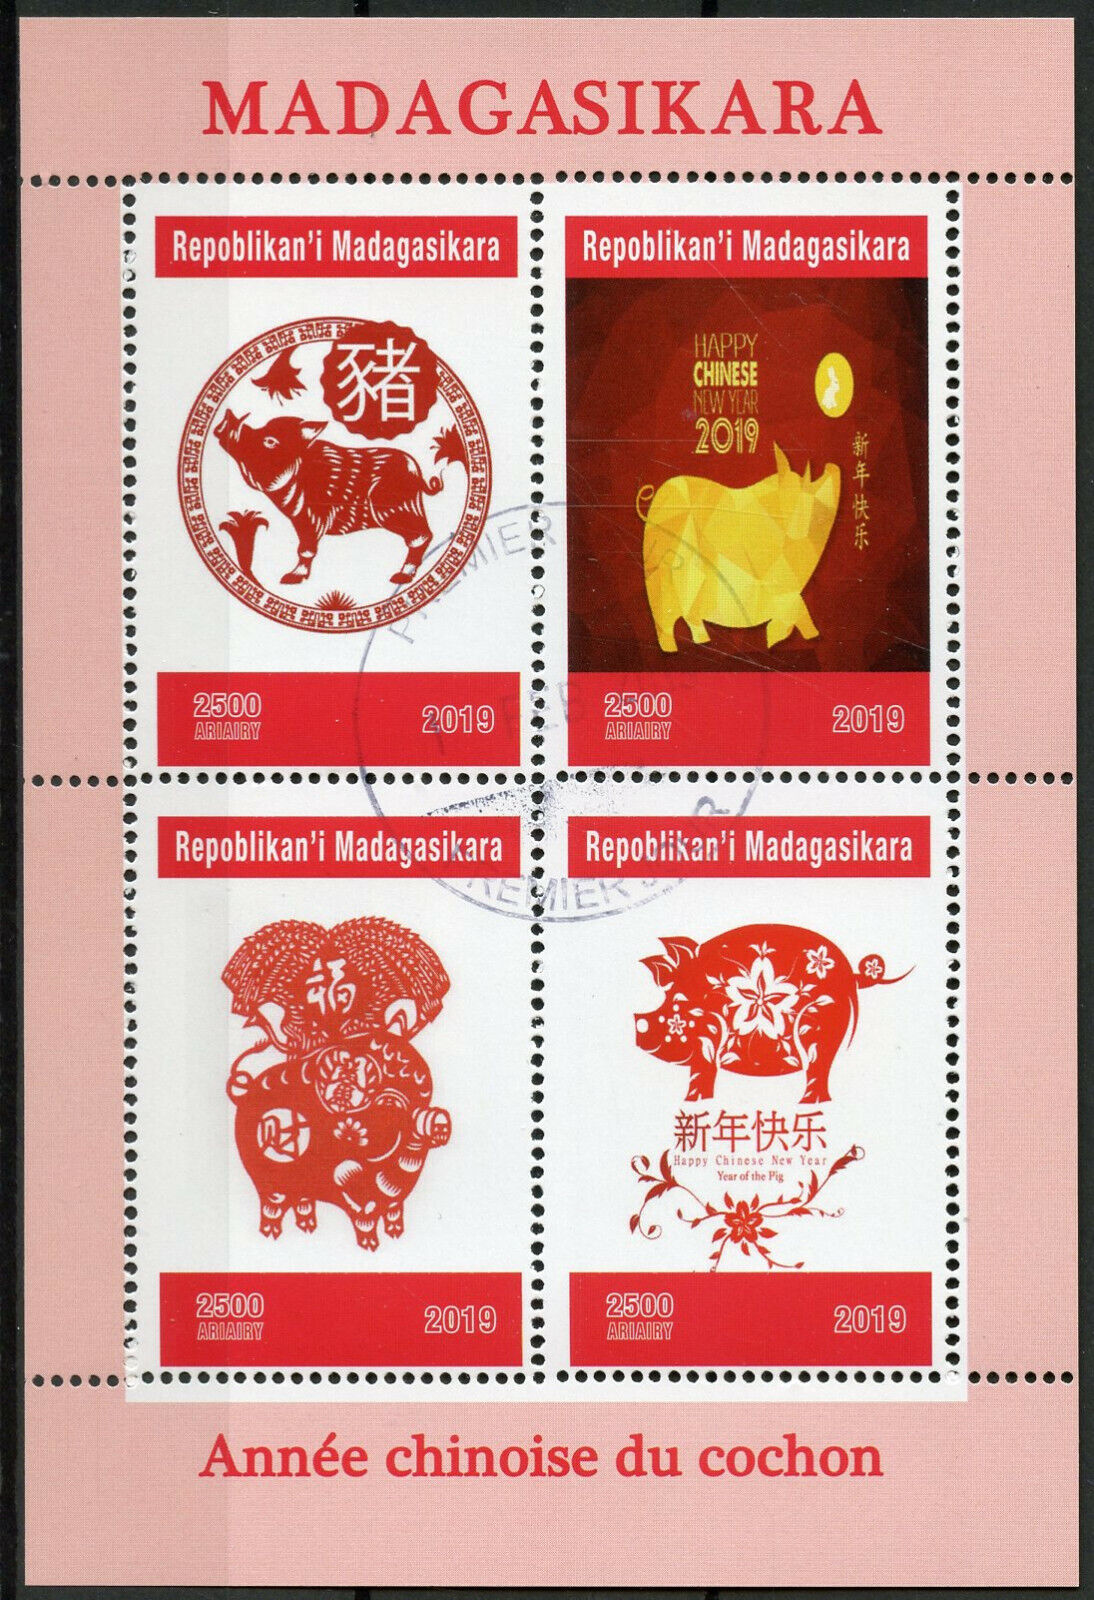 Madagascar 2019 CTO Year of Pig 4v St S Max 84% OFF M New Soldering Lunar Chinese